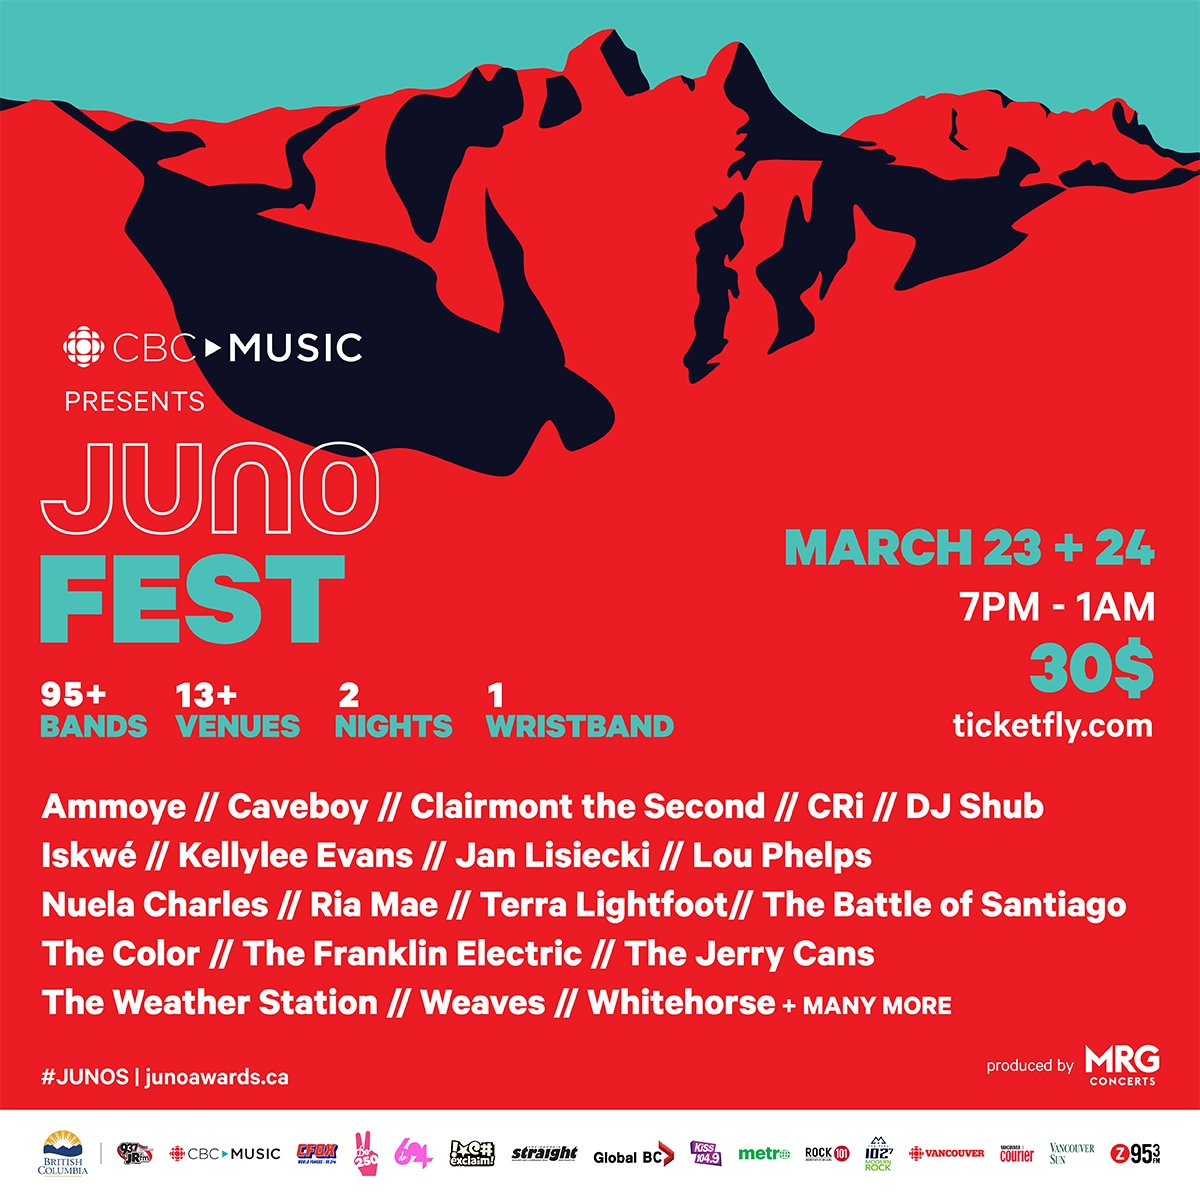 .@Junofest starts this Friday in #Vancouver! Wristbands are on sale now! One wristband, 2 nights, 13+ venues, AND 95+ bands! Presented by @CBCMusic! 🎫: buff.ly/2HDDNlN ℹ️: buff.ly/2pfbenD 🎉: @JUNOfest / #JUNOFest